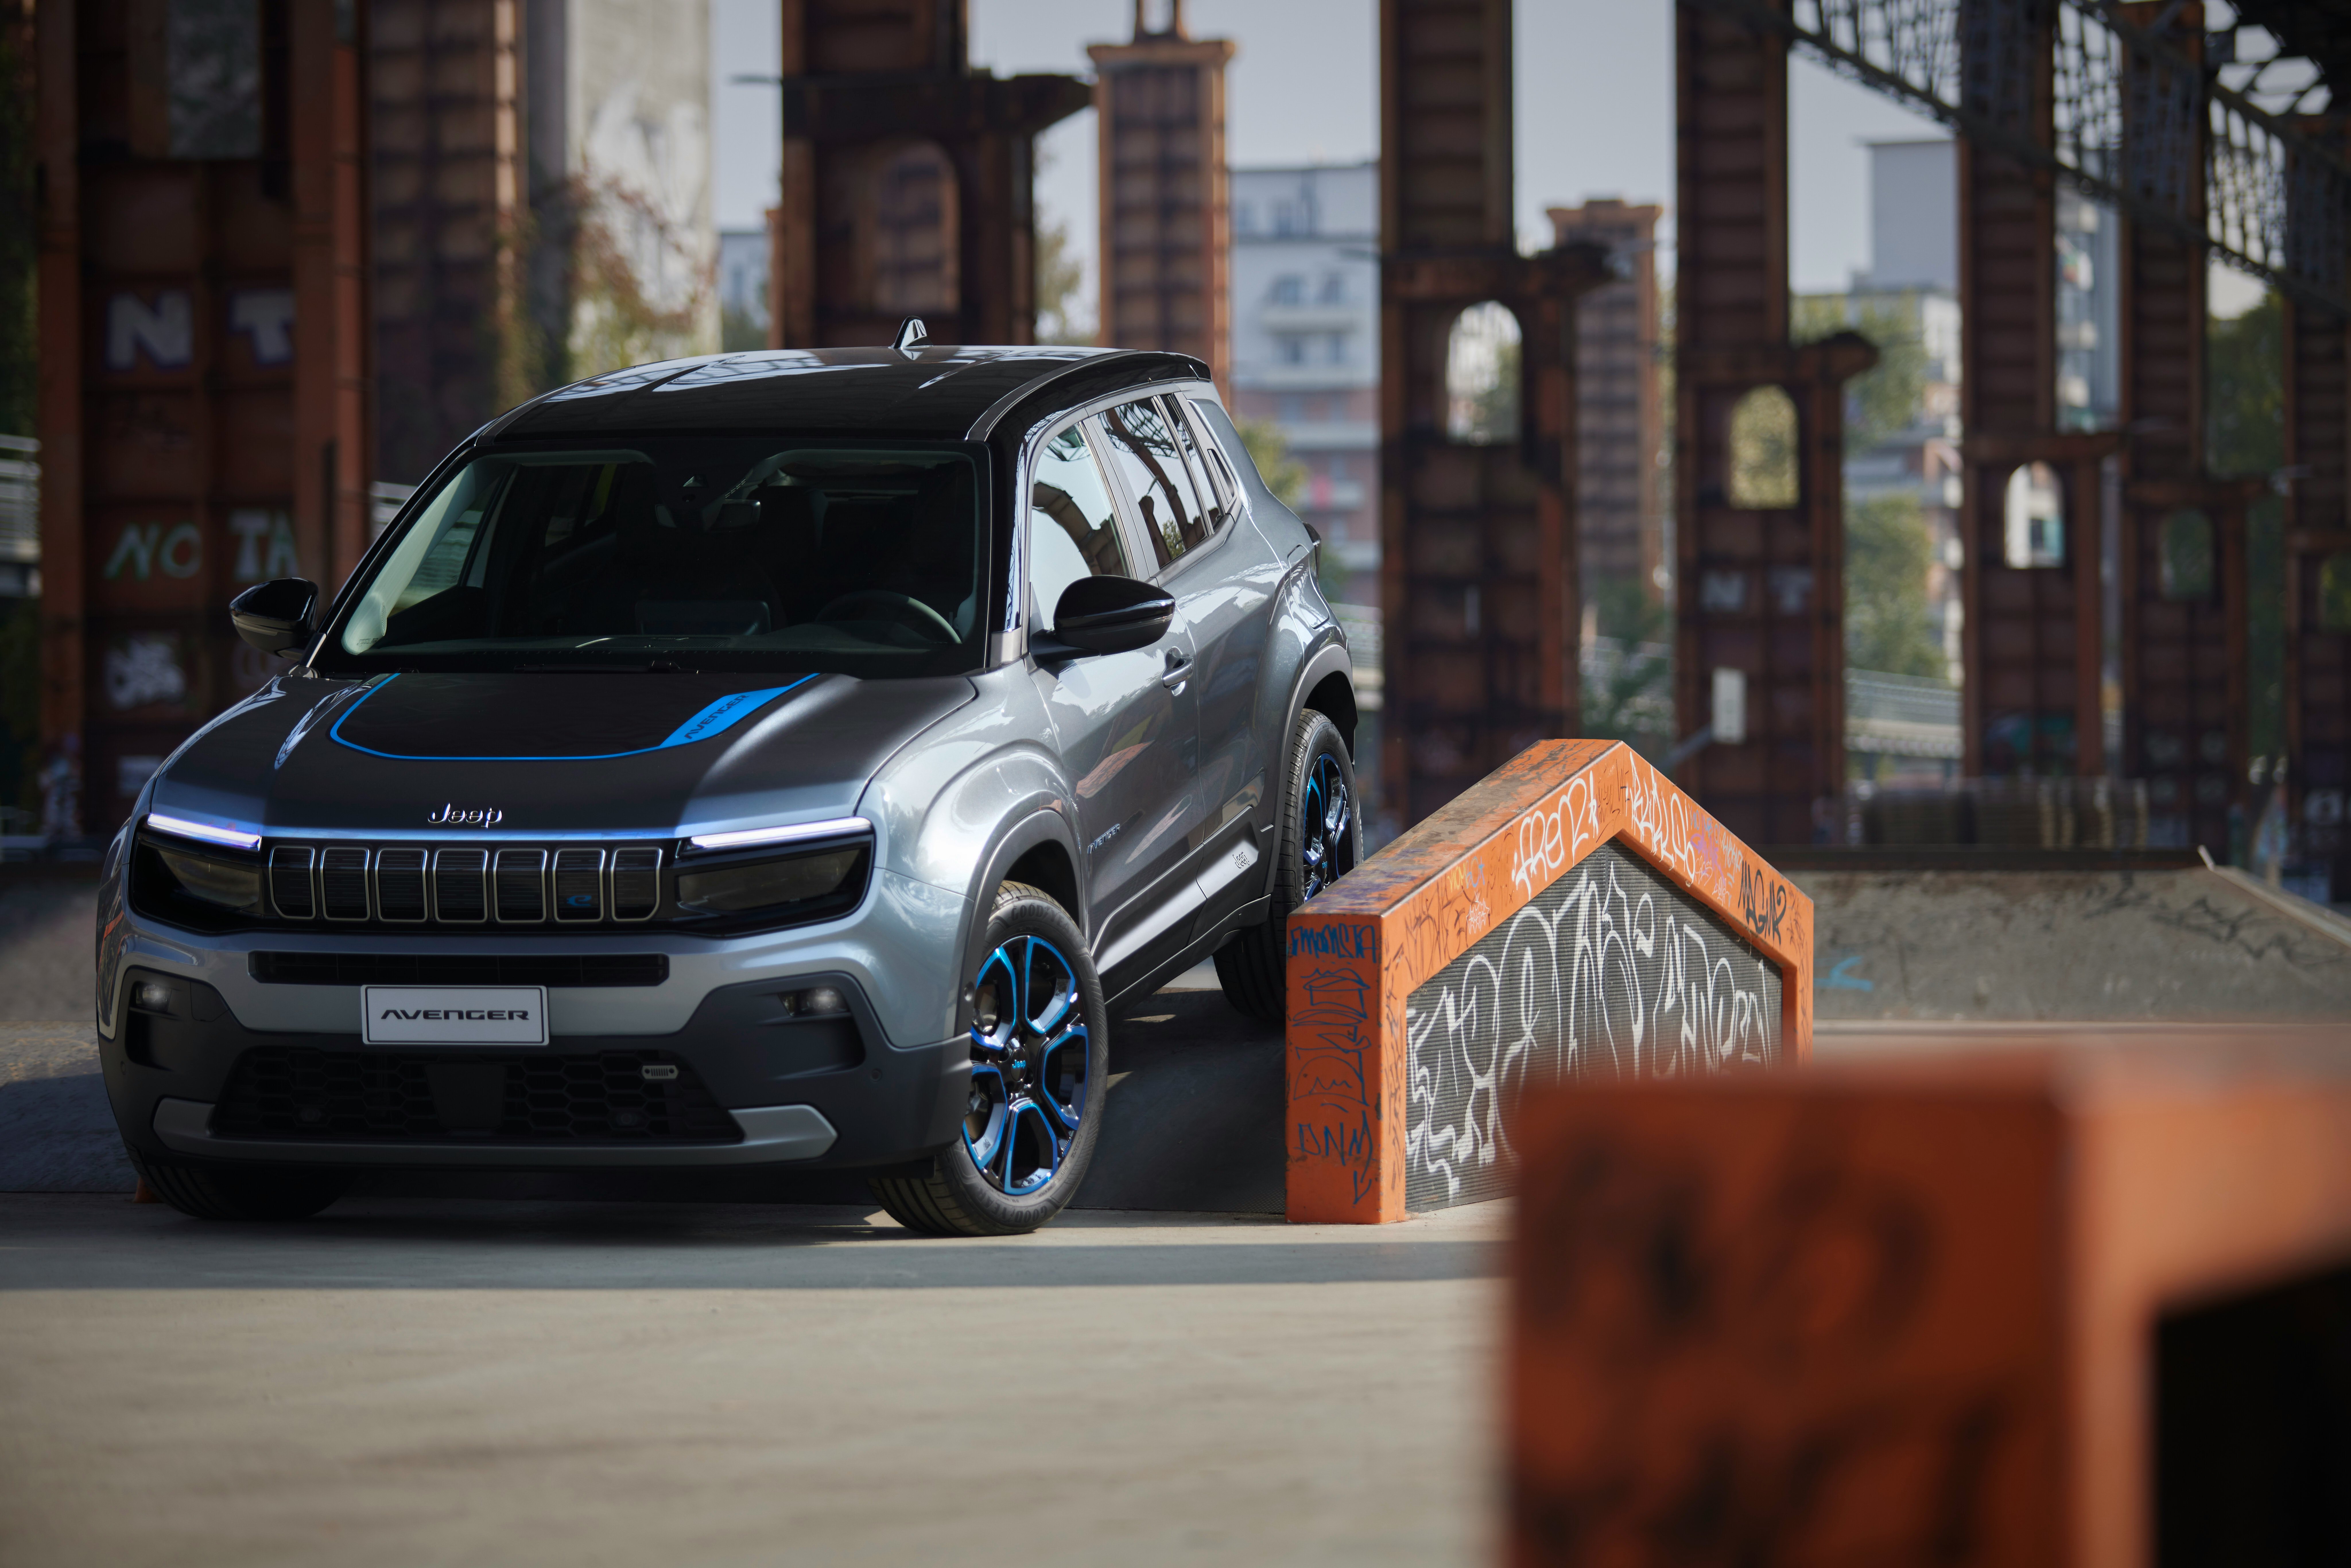 Jeep Avenger electric SUV: price, release date, and range